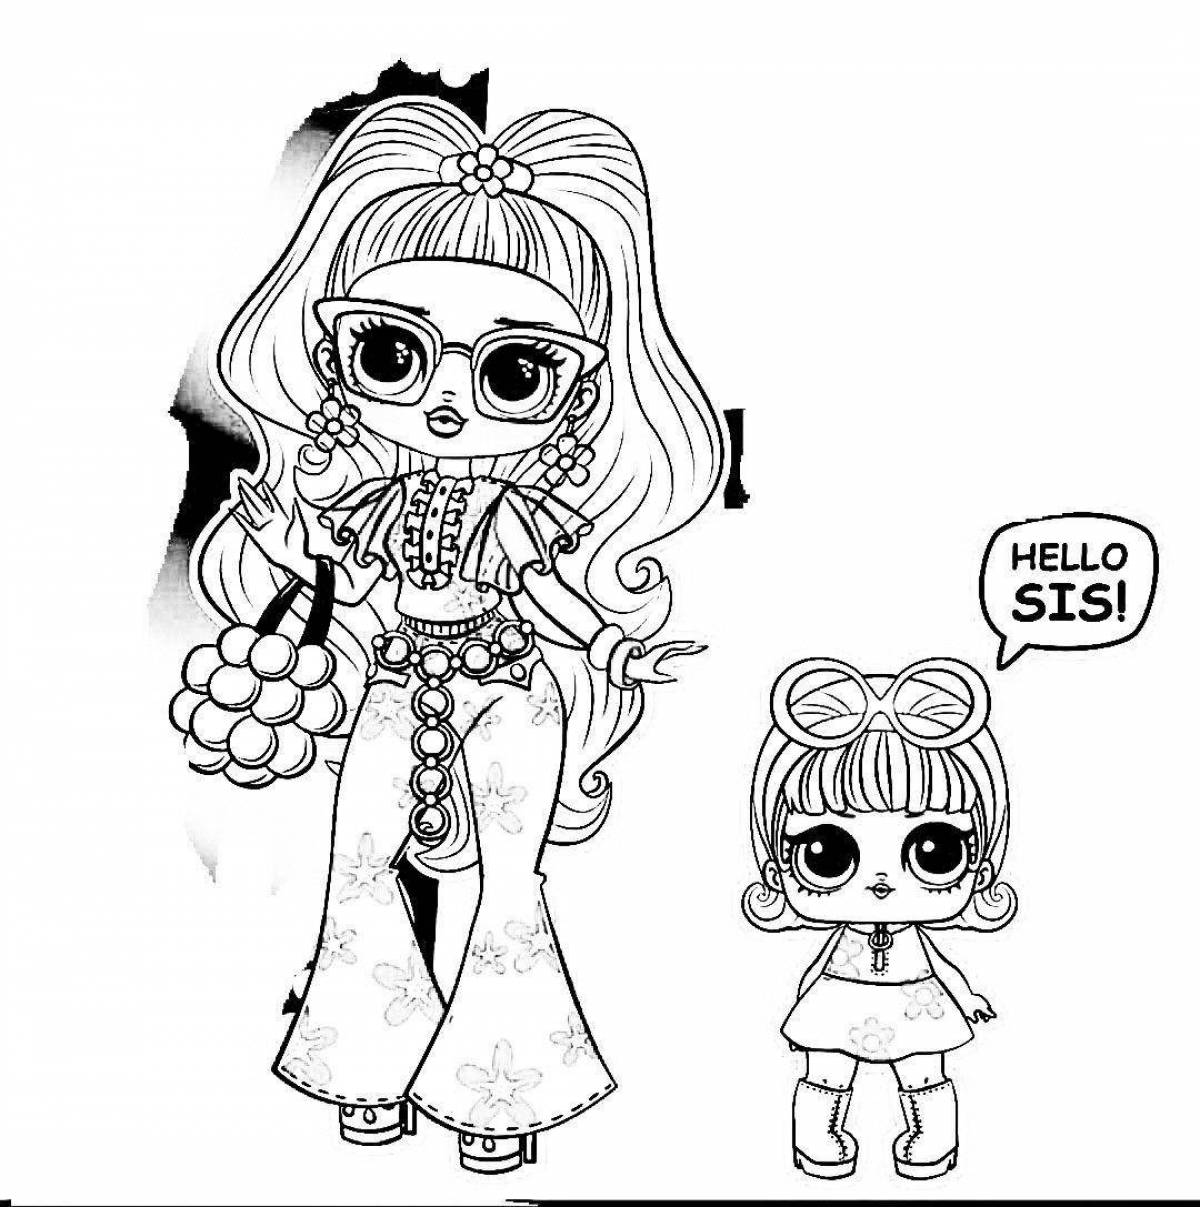 Awesome lola fanfan coloring page